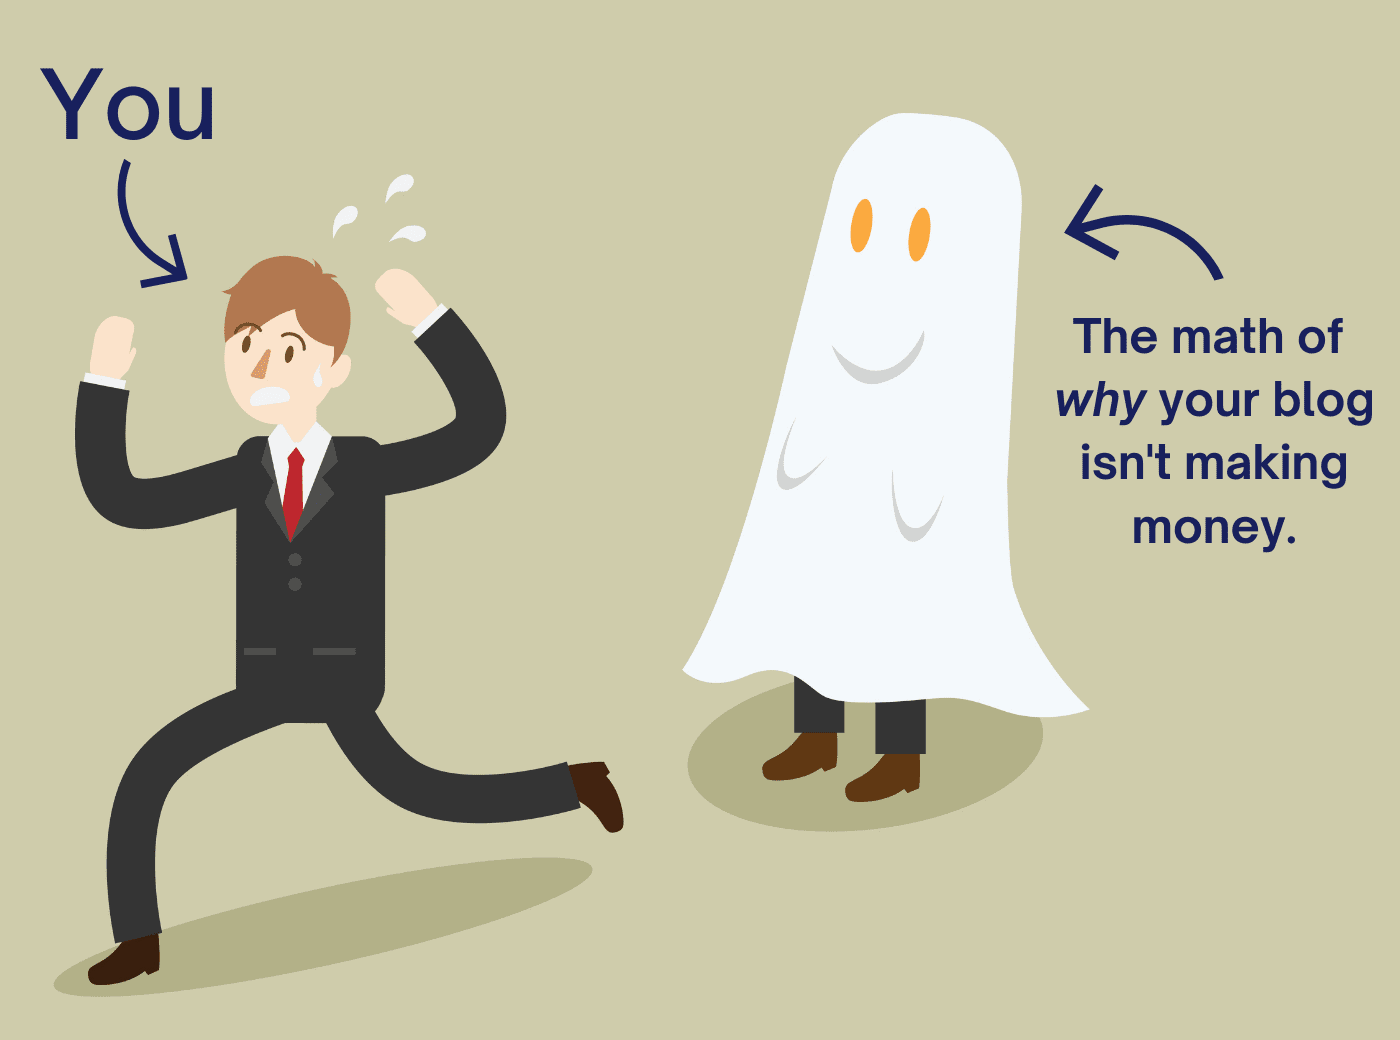 You vs. the math of why your blog isn't making money (A cartoon image of a man running away from a ghost)